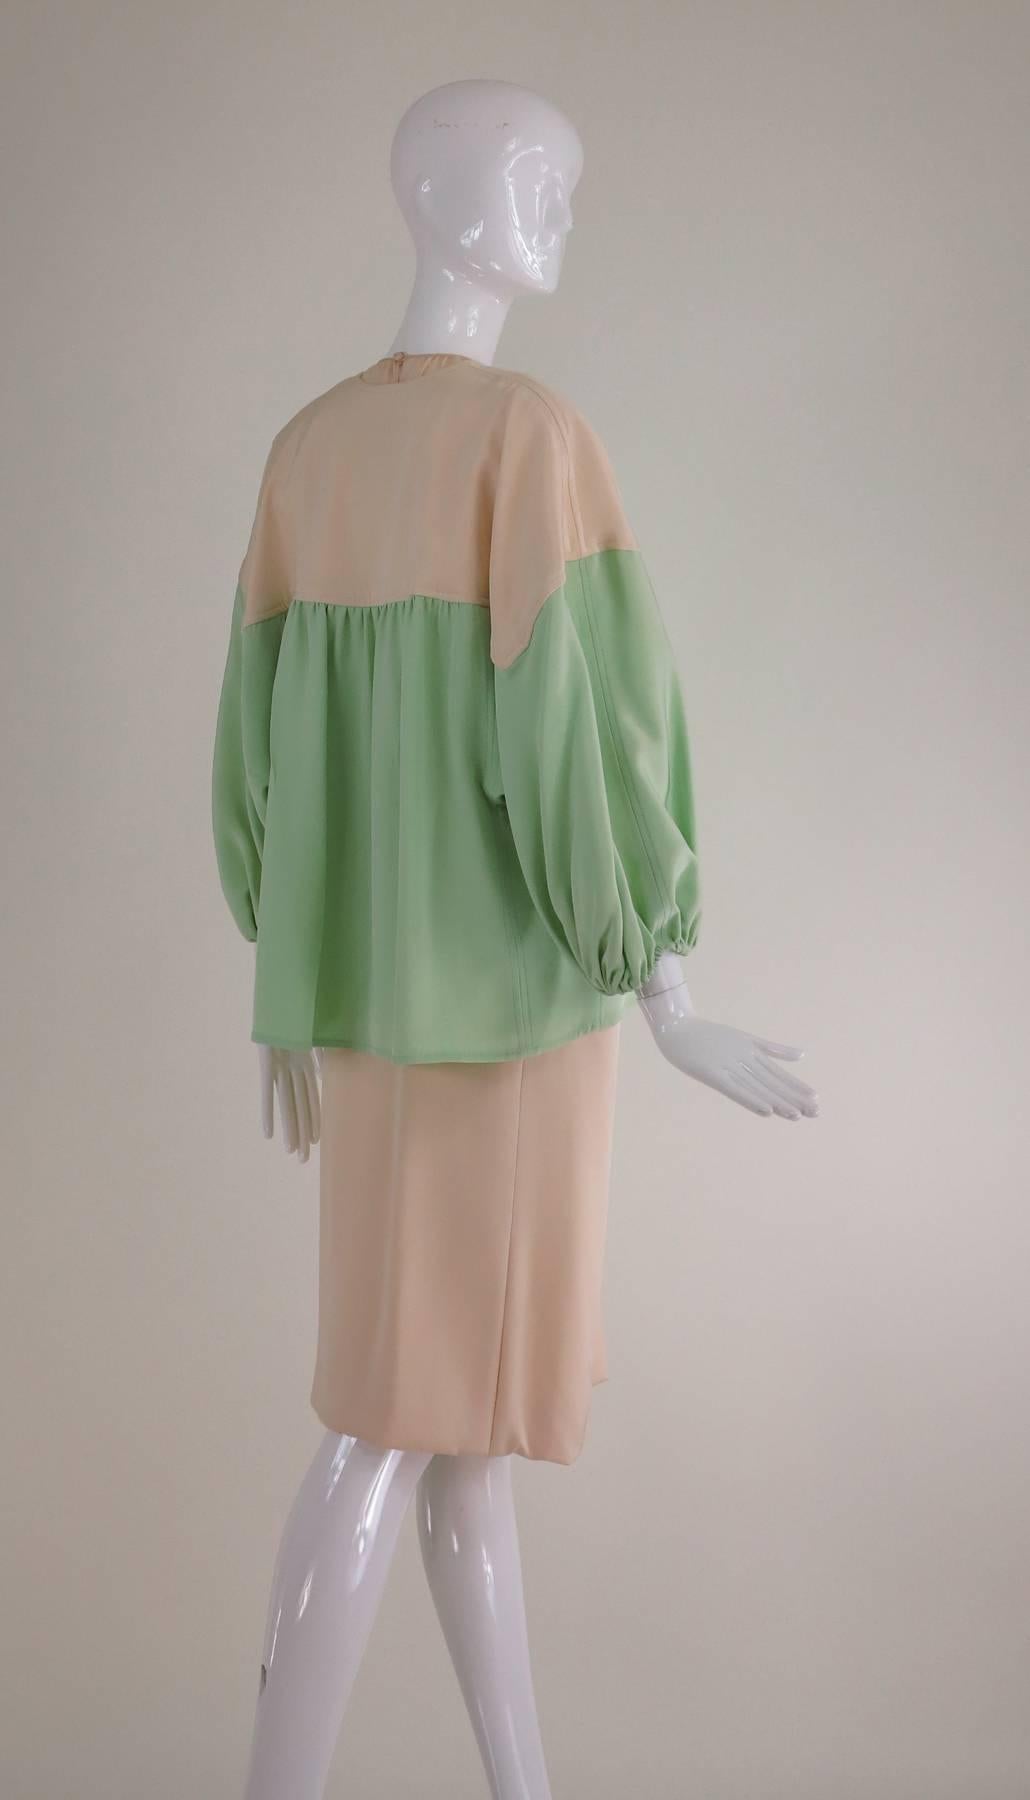 Jacqueline de Ribes cream & mint silk 3pc ensemble 1980s.  Beautifully constructed garments starting with the cream charmeuse silk sleeveless pull on blouse has a jewel neckline with slight gathering at the front, closes at the neck back with a